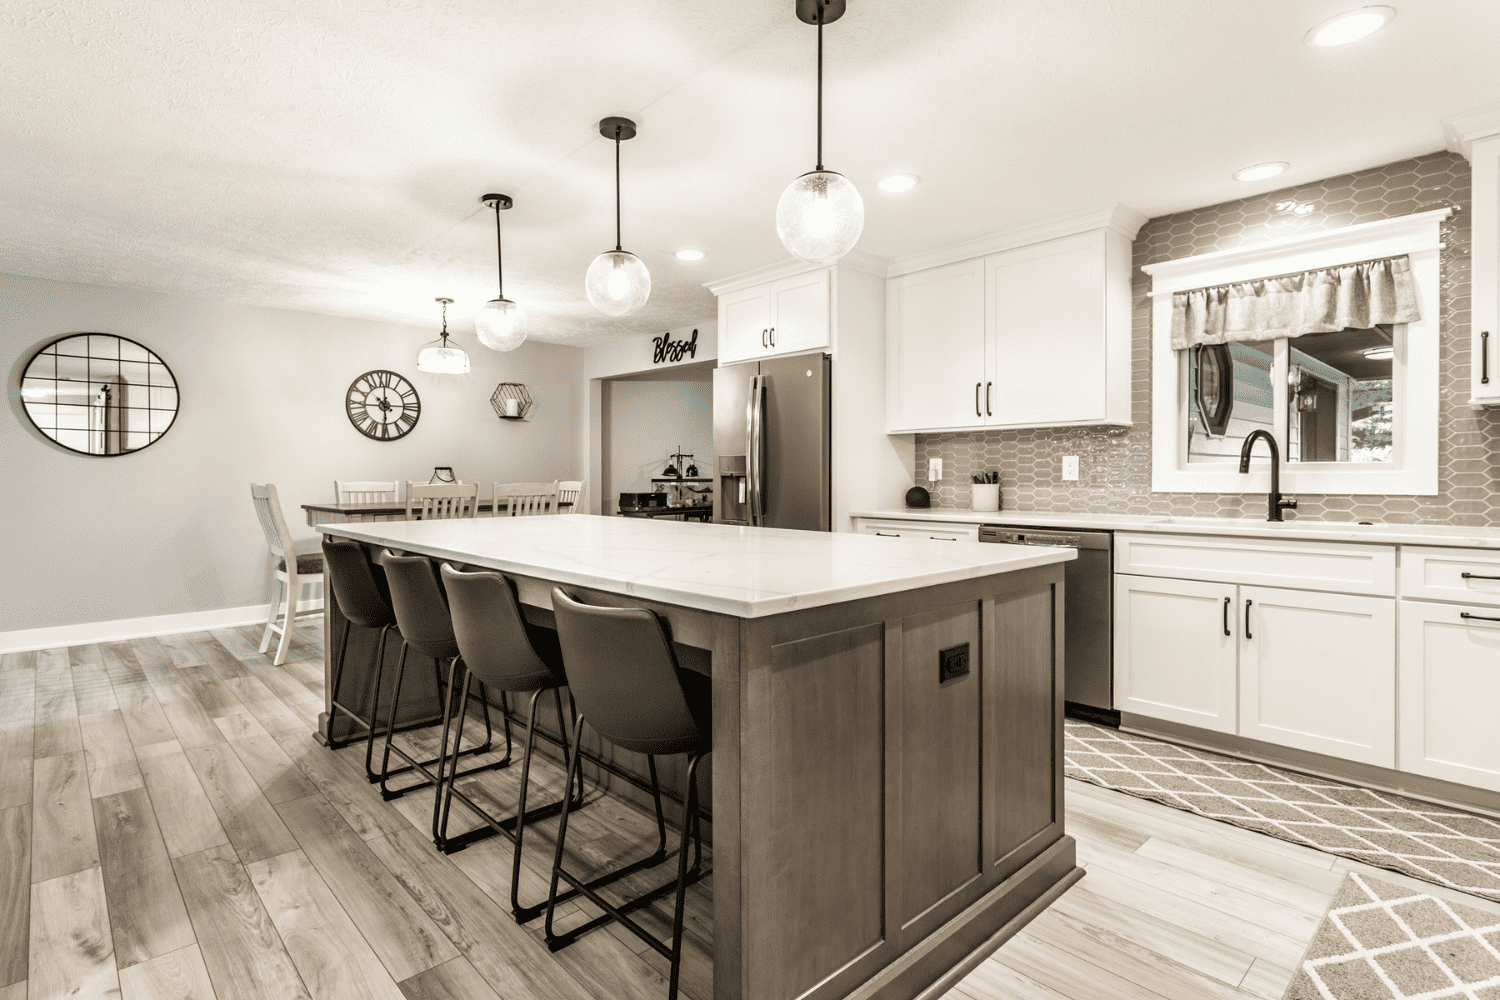 Nicholas Design Build | A neutral kitchen with a center island and bar stools.